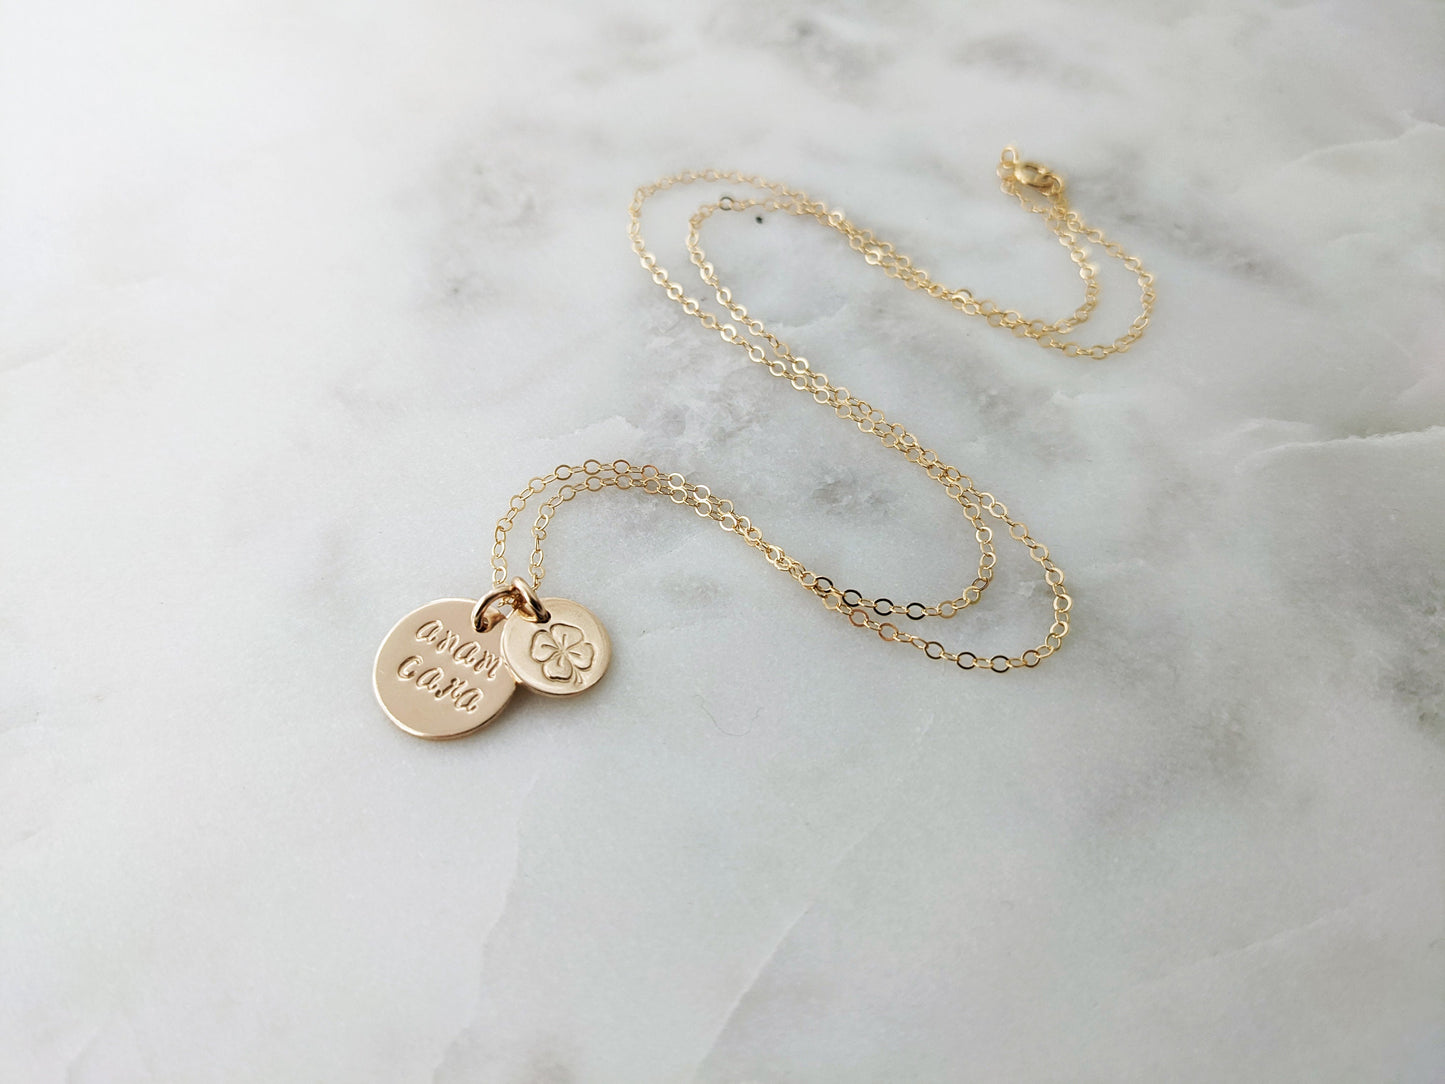 Anam Cara Necklace | Irish for Soul Friend Necklace